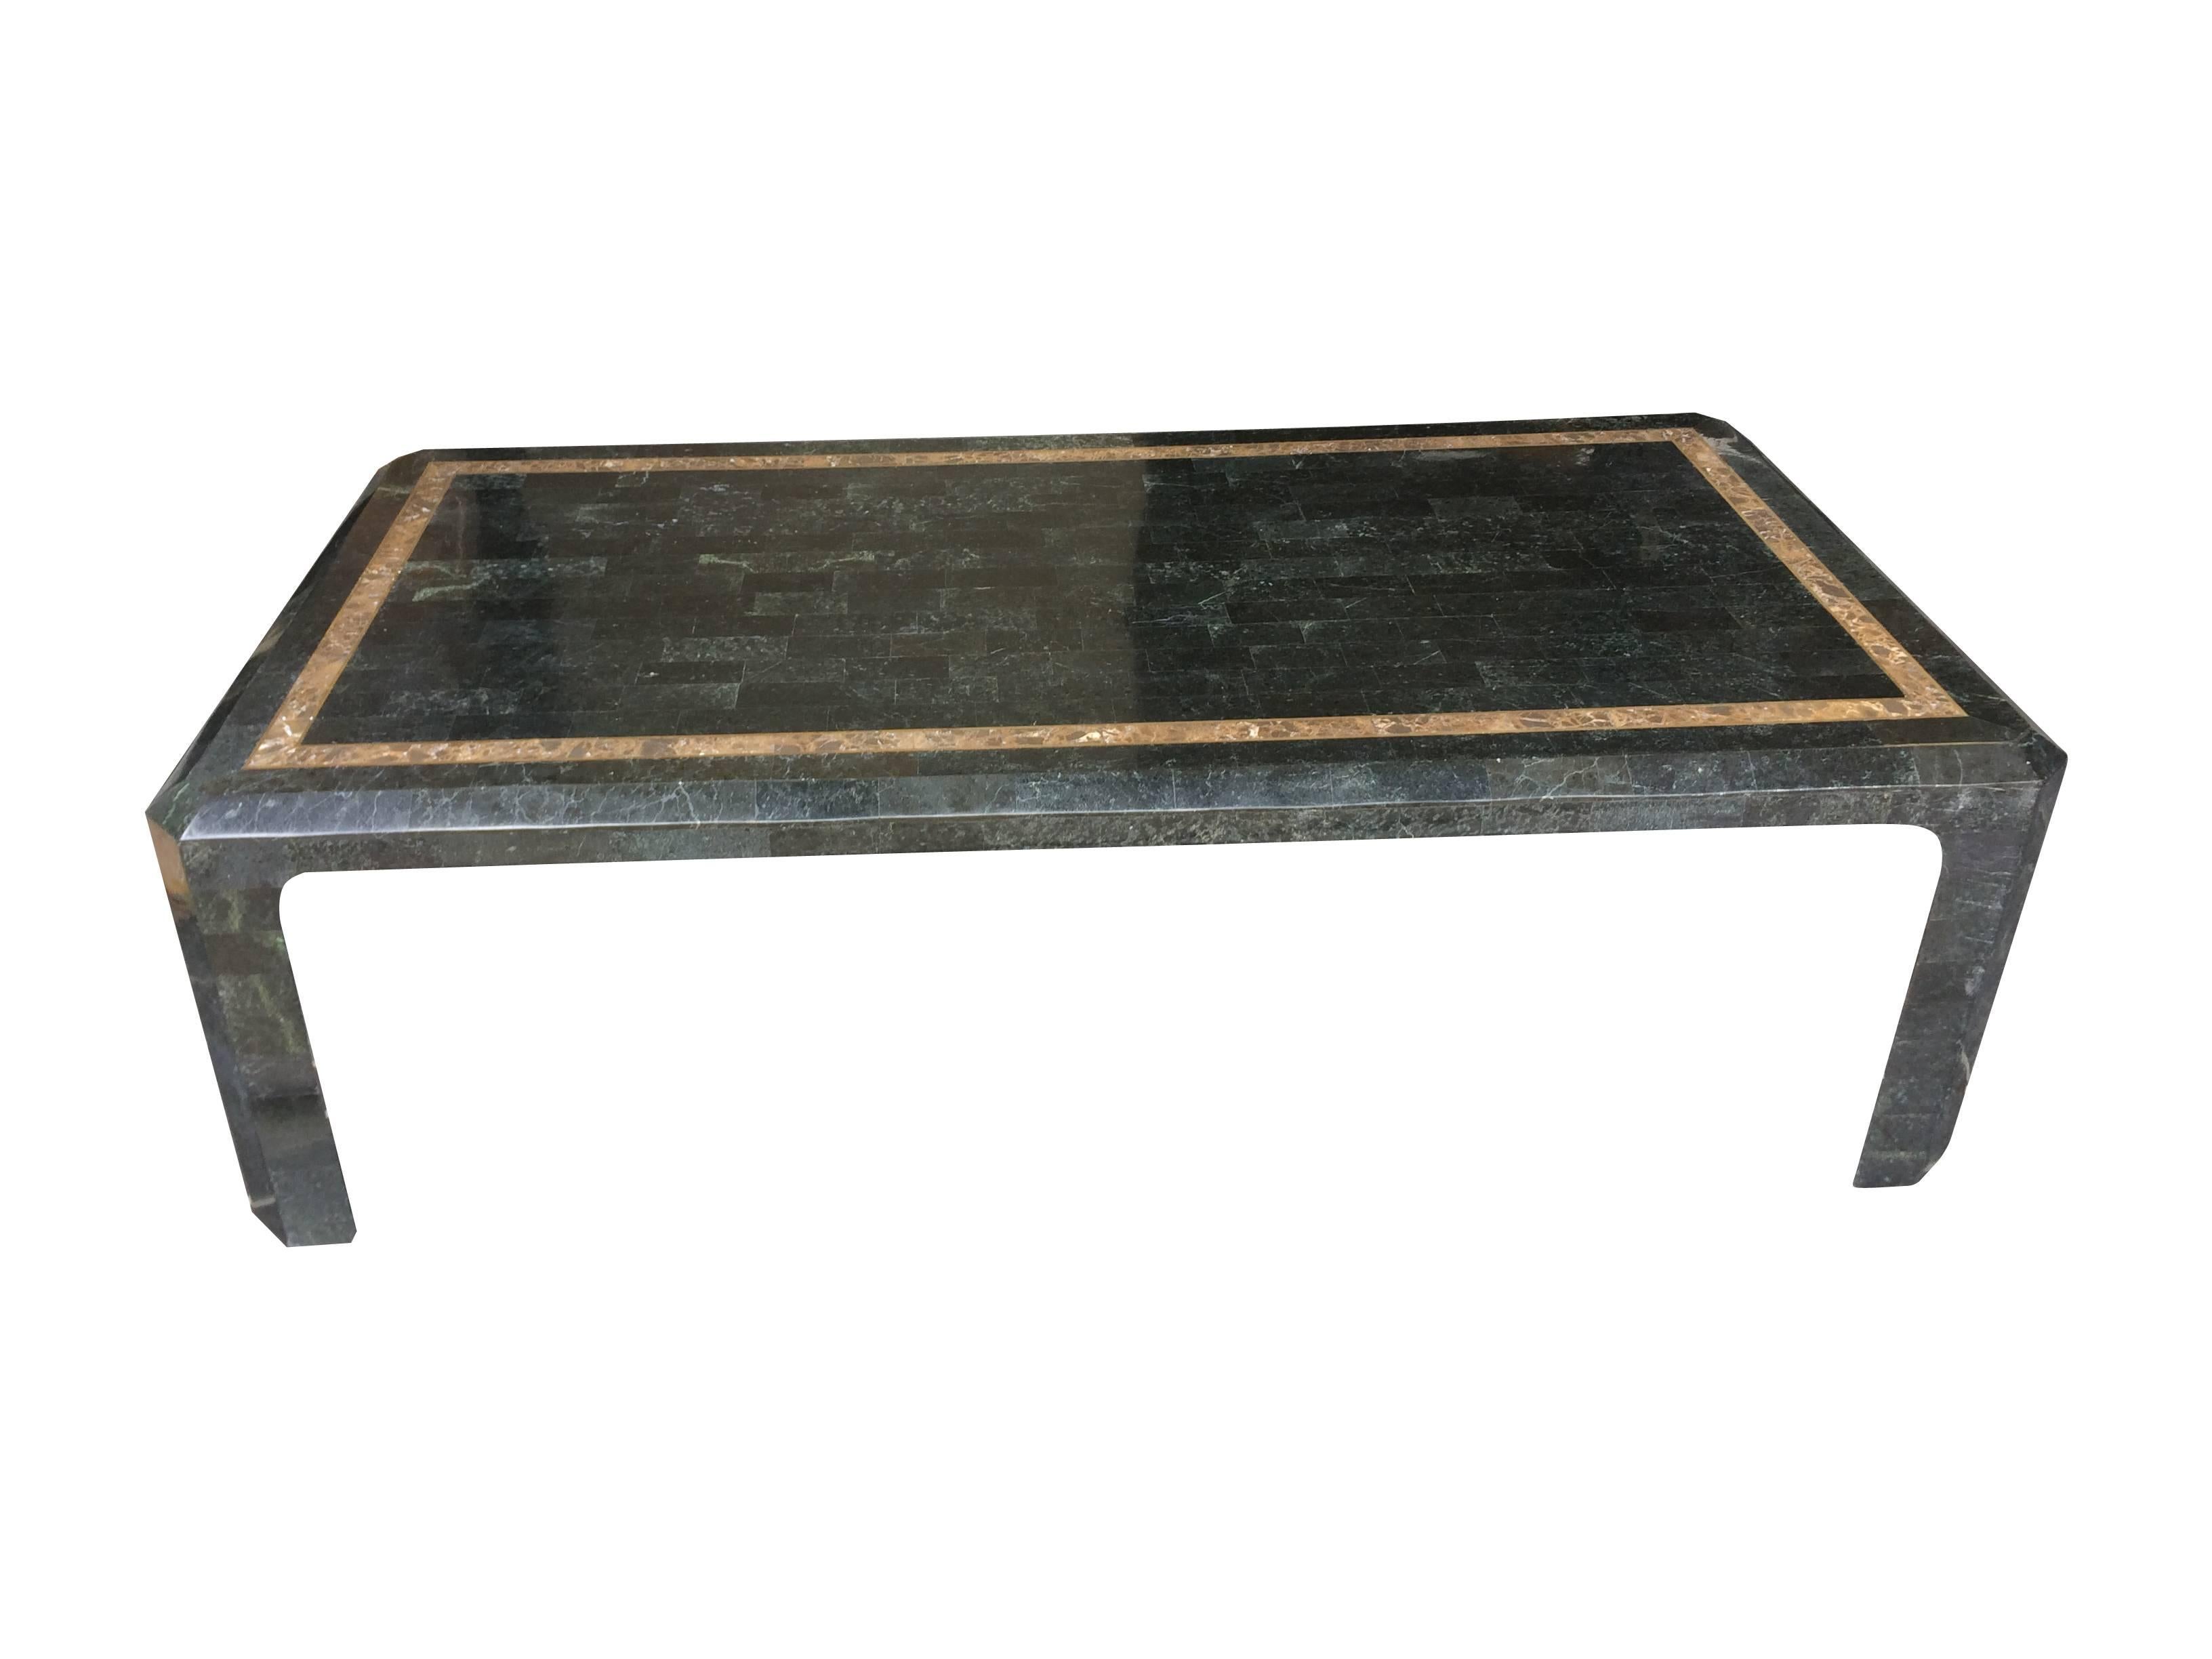 A Maitland-Smith tessellated marble and black / dark green stone coffee table, with brass inlay around the marble on a wooden frame. Beautifully made and in great condition.